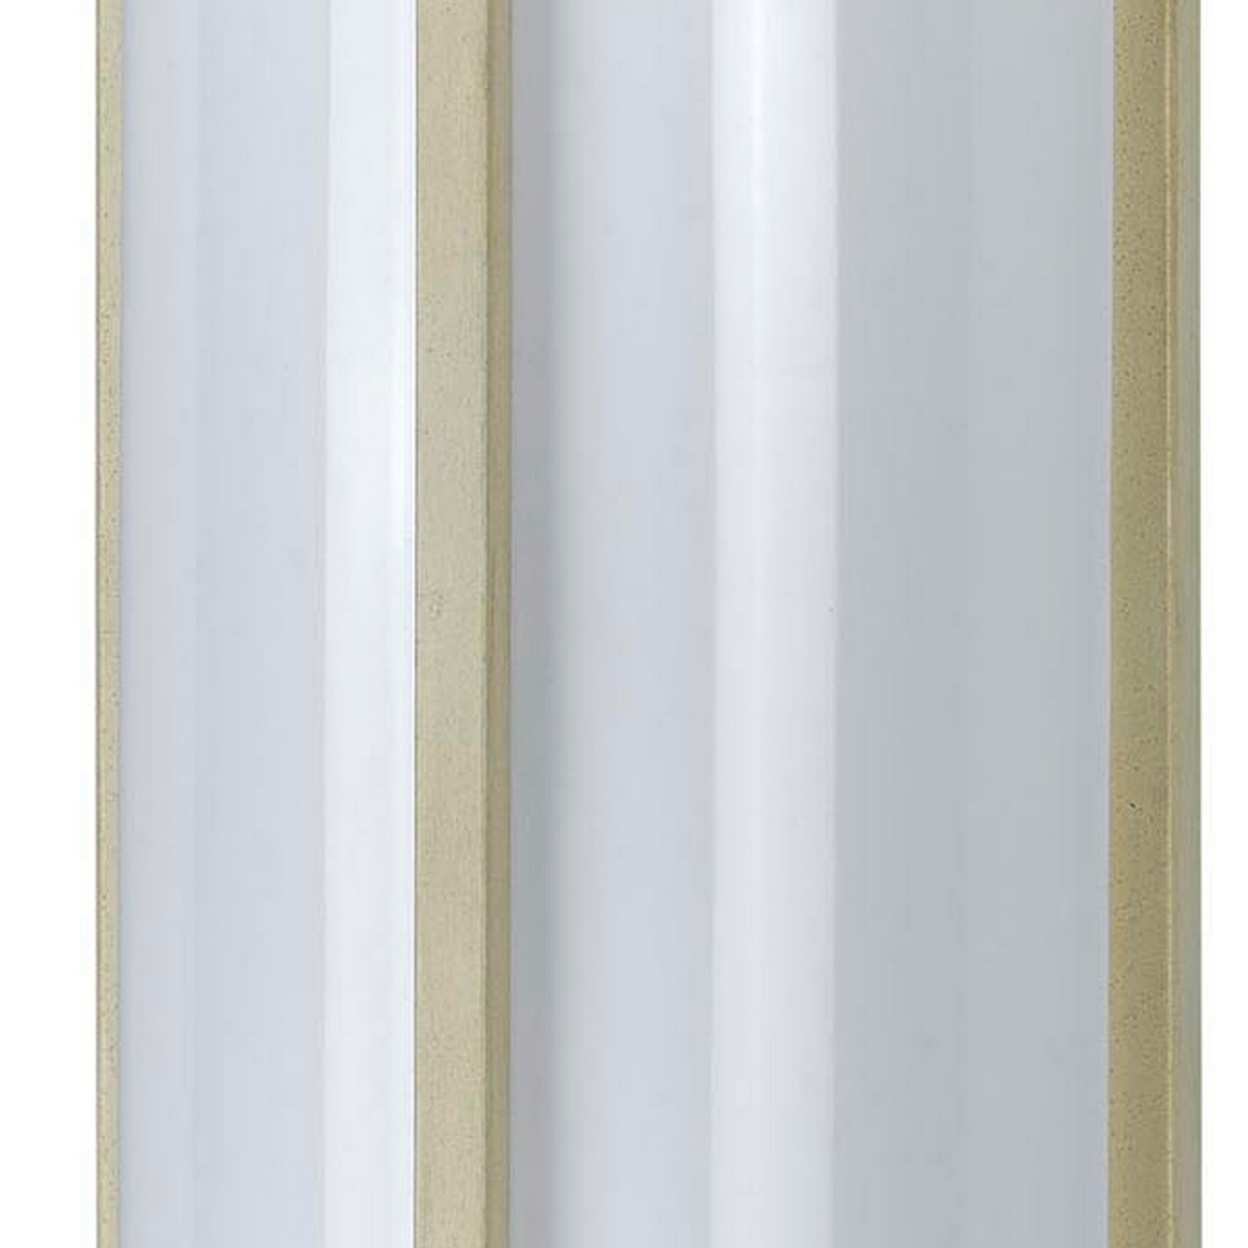 Cylindrical Shaped Metal PLC Wall Lamp With 3D Design Trim,Set Of 4, White- Saltoro Sherpi